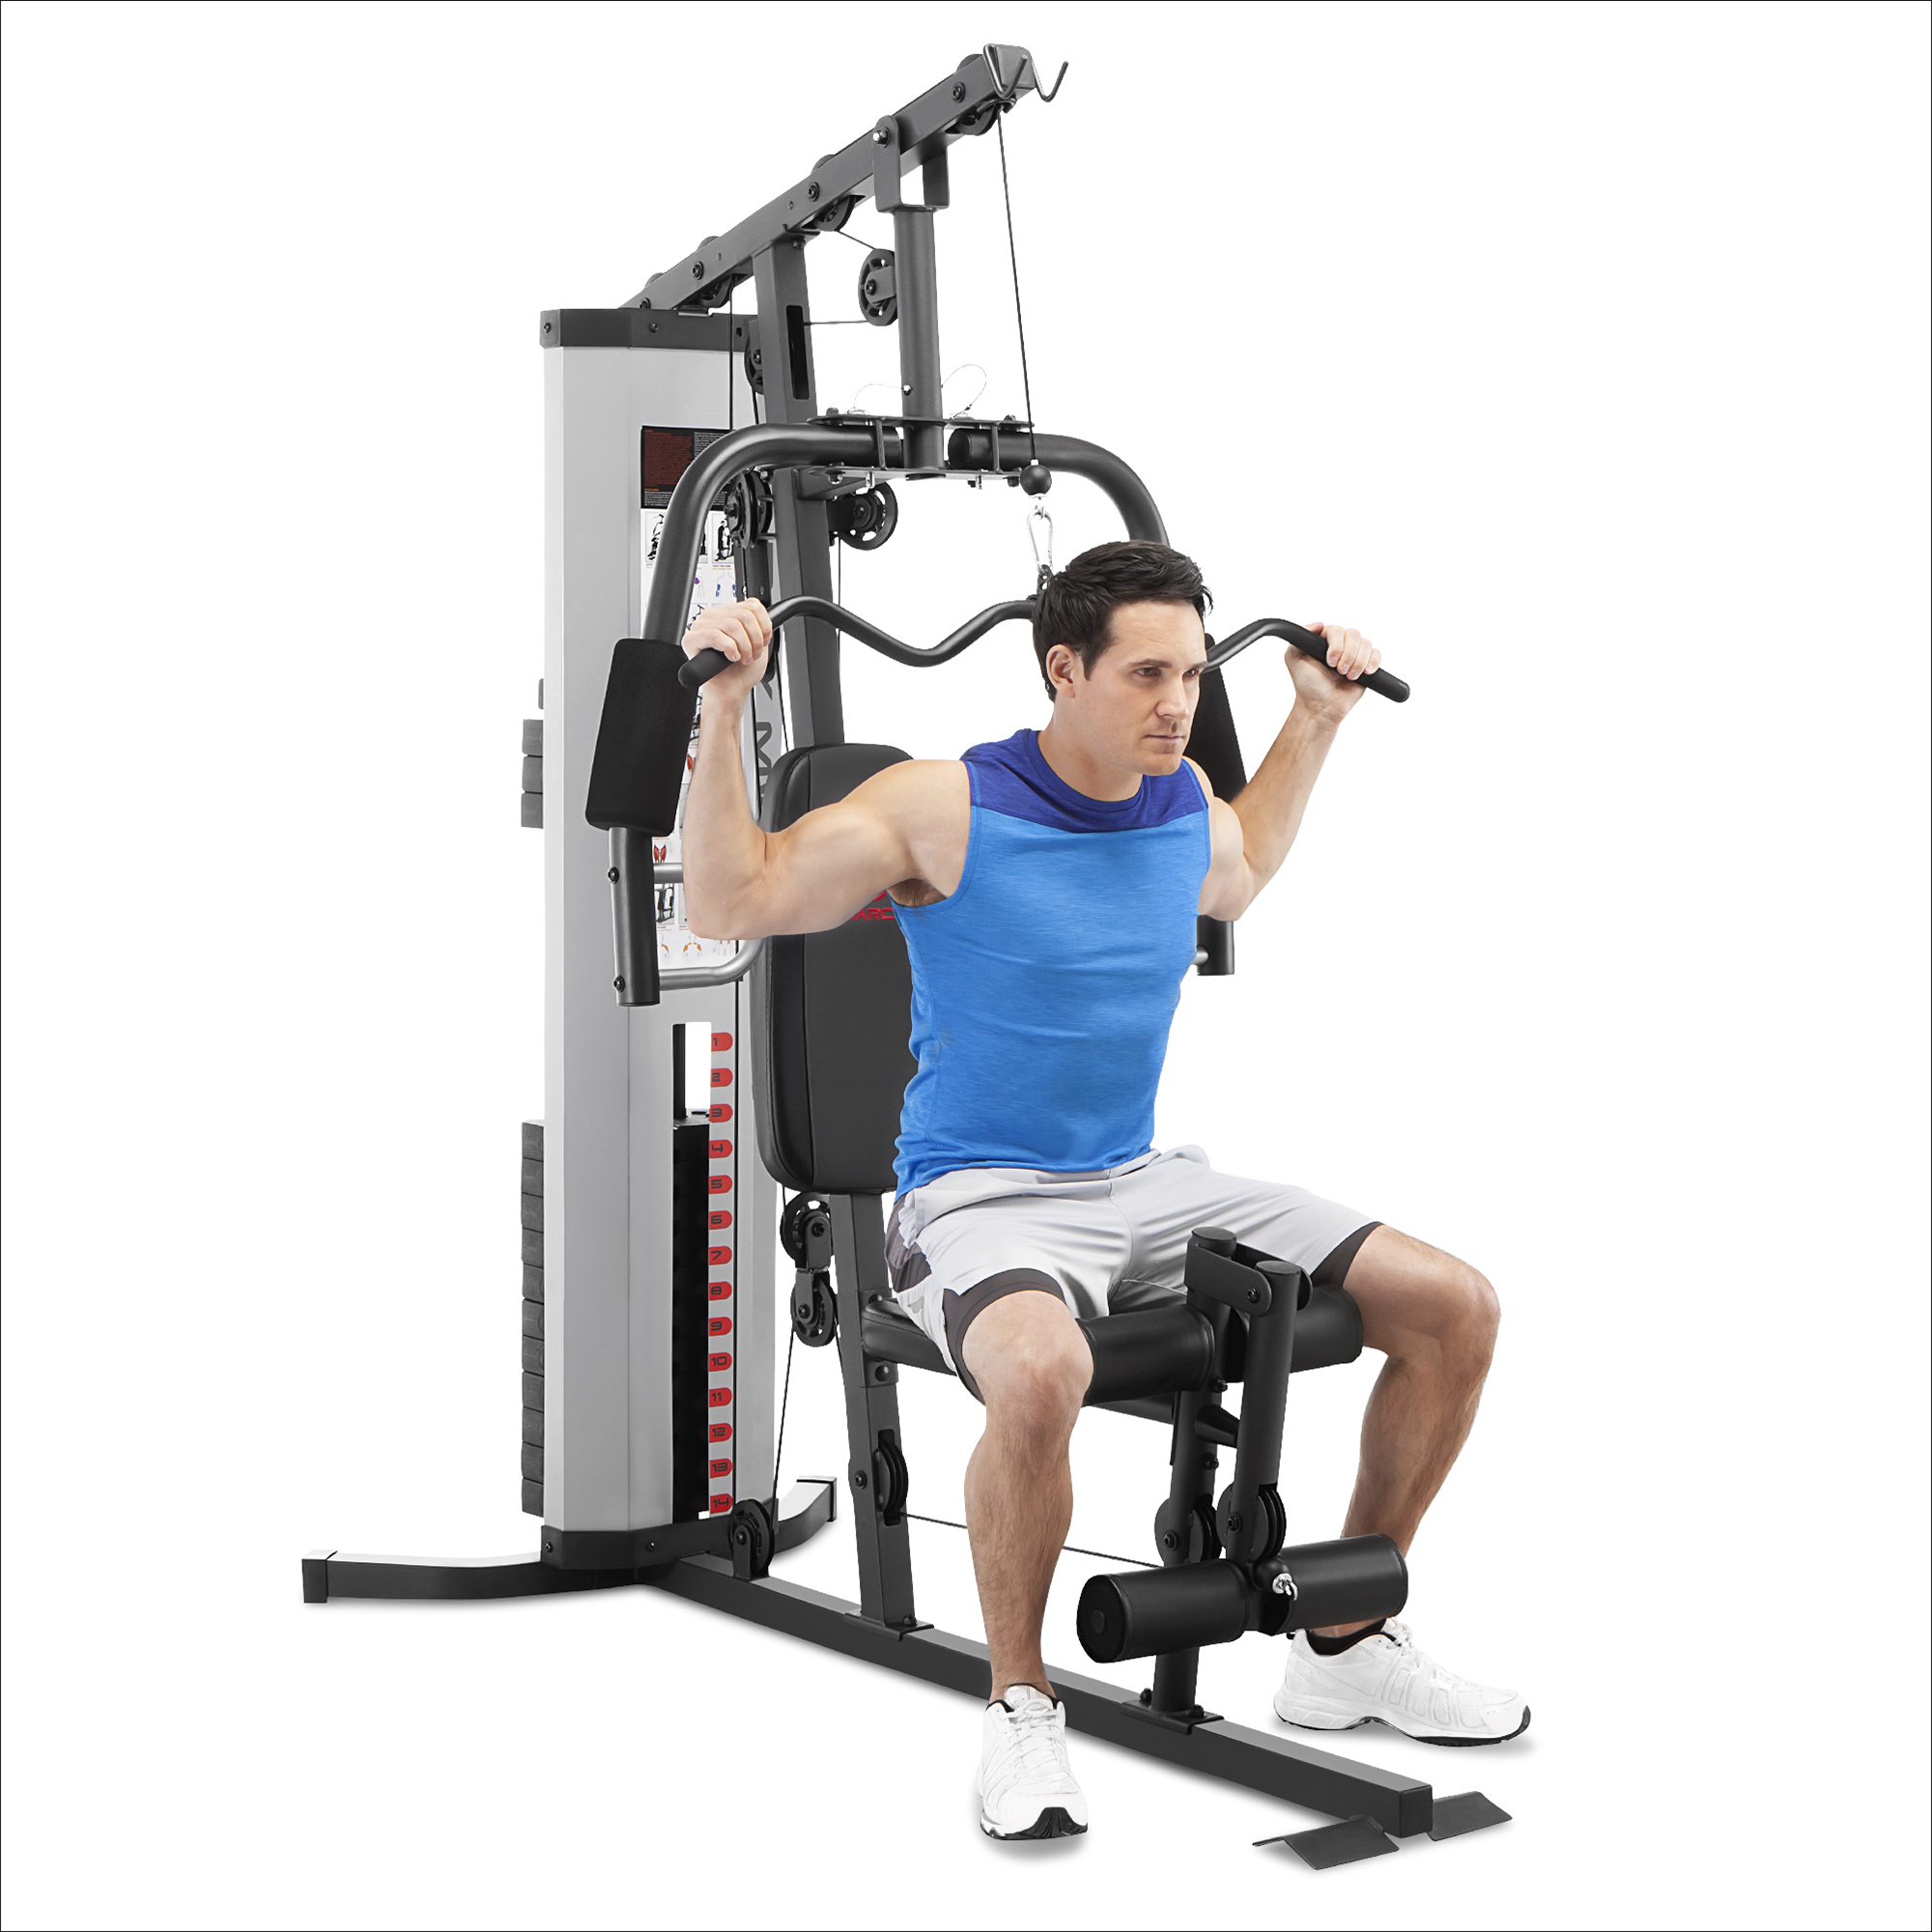 https://cdn11.bigcommerce.com/s-r2fl439k1s/images/stencil/original/products/138/2150/Marcy_Home_Gym_System_150lb_Weight_Stack_Machine_MWM-988_-_Rear_Lat_Pull_Down__53065.1677714781.jpg